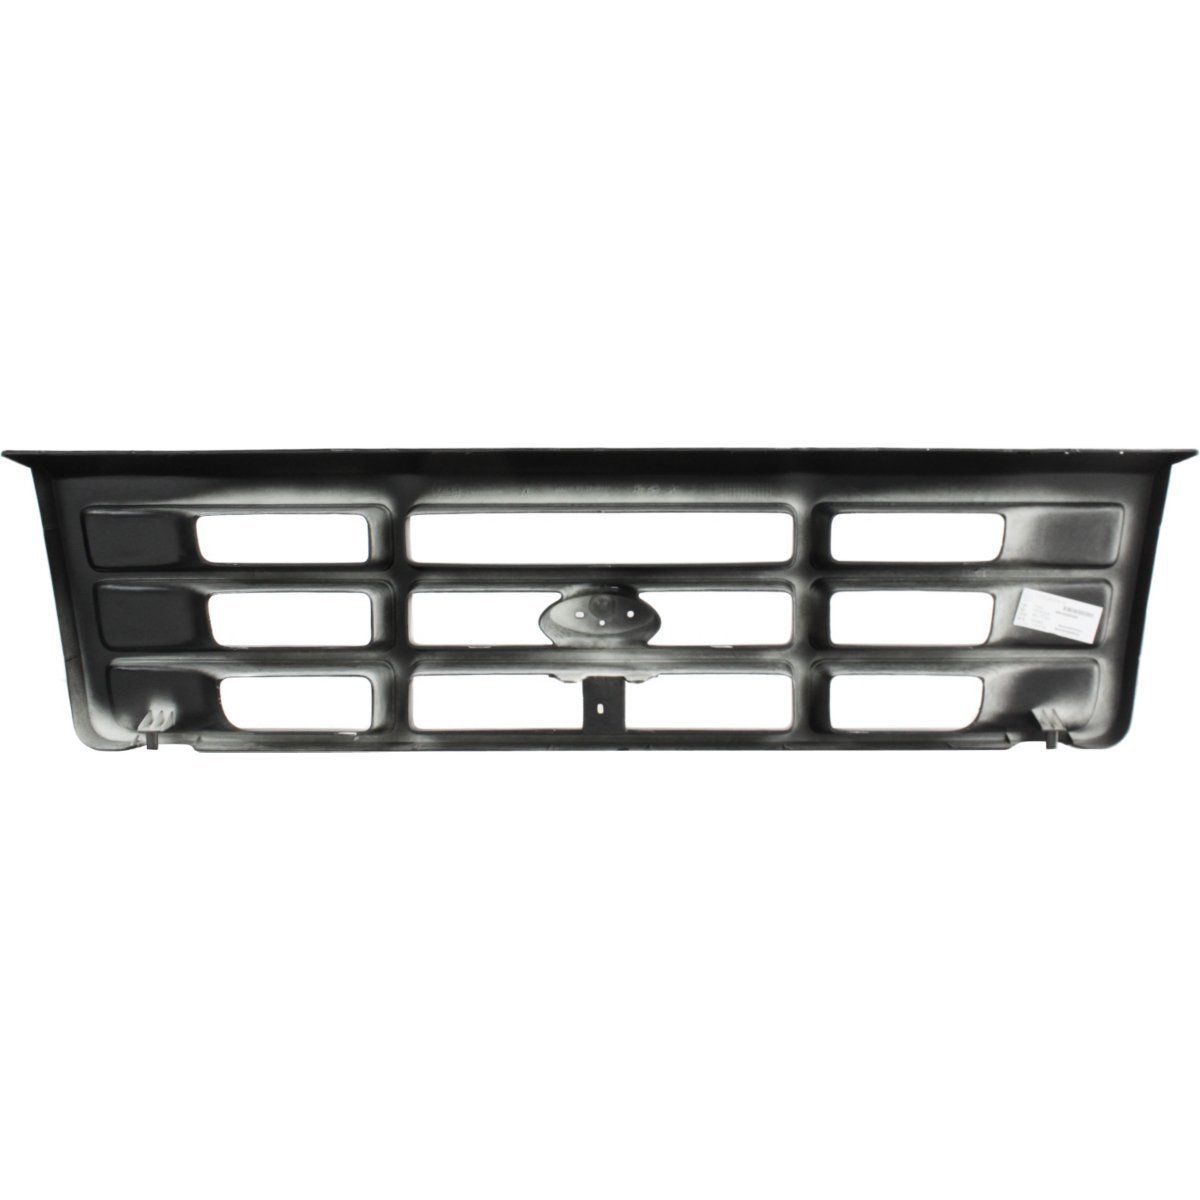 (1992-1997) F-Series & Bronco - Complete Performance - Paintable Grille